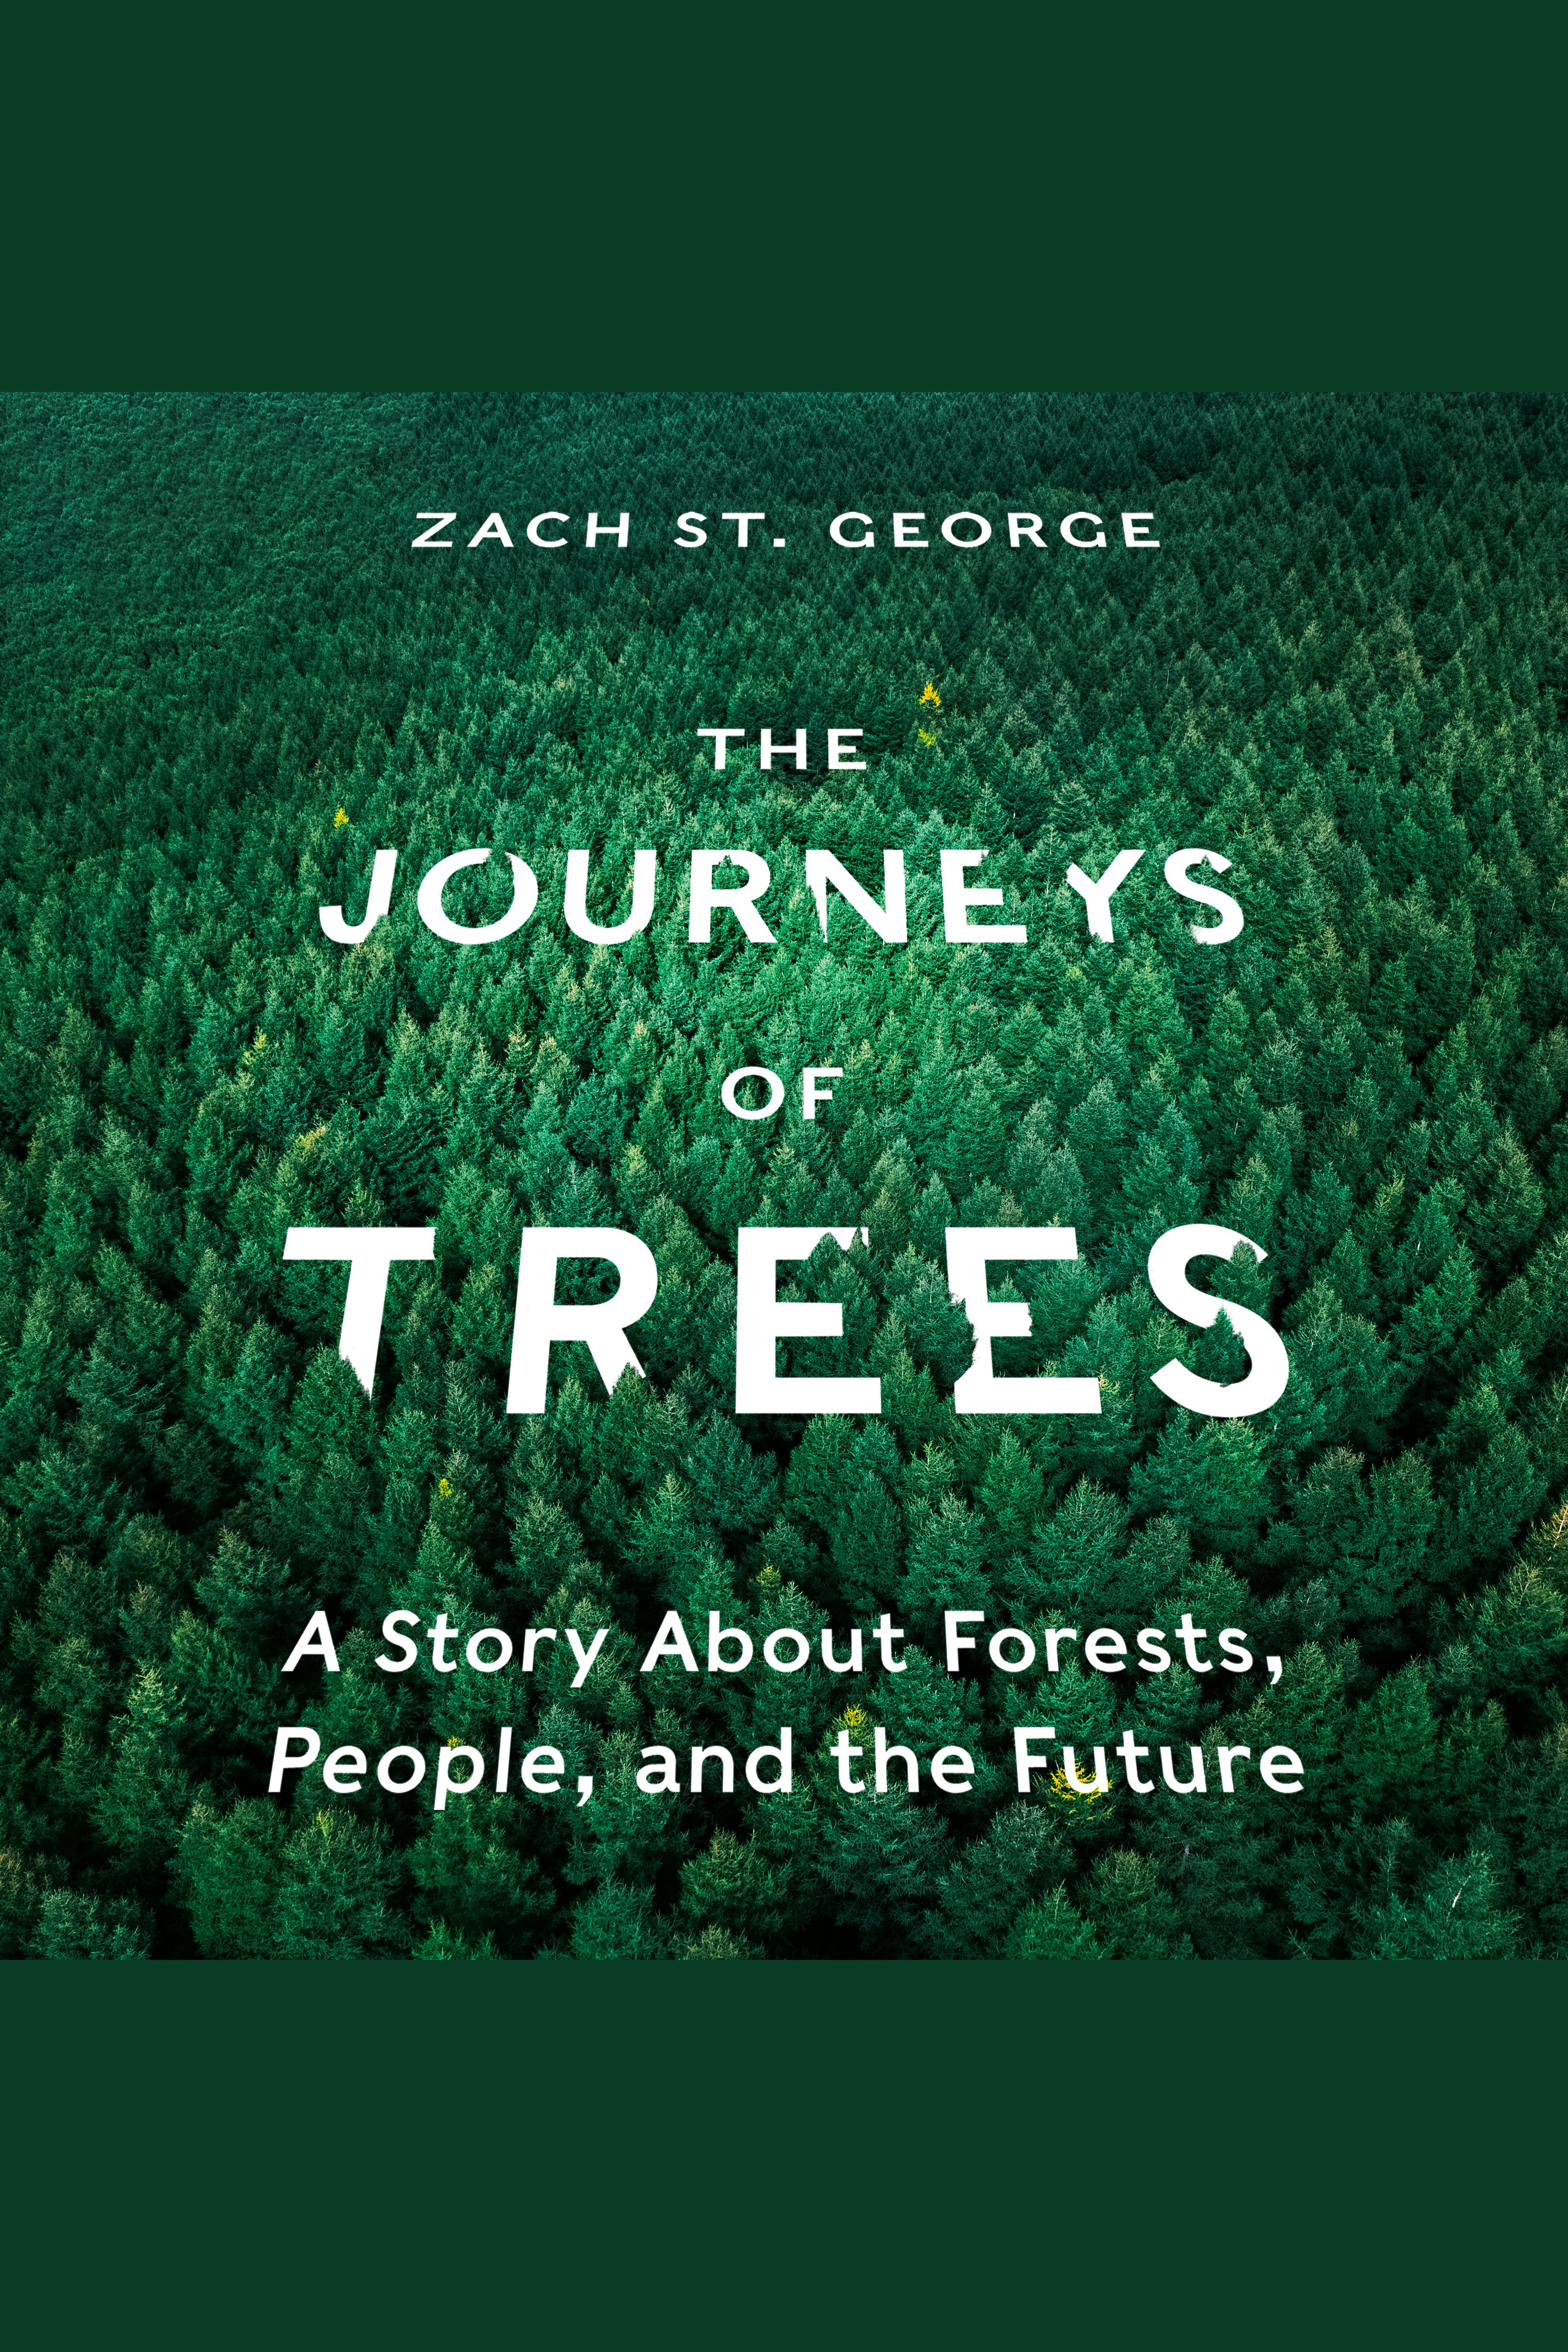 The journeys of trees a story about forests, people, and the future cover image